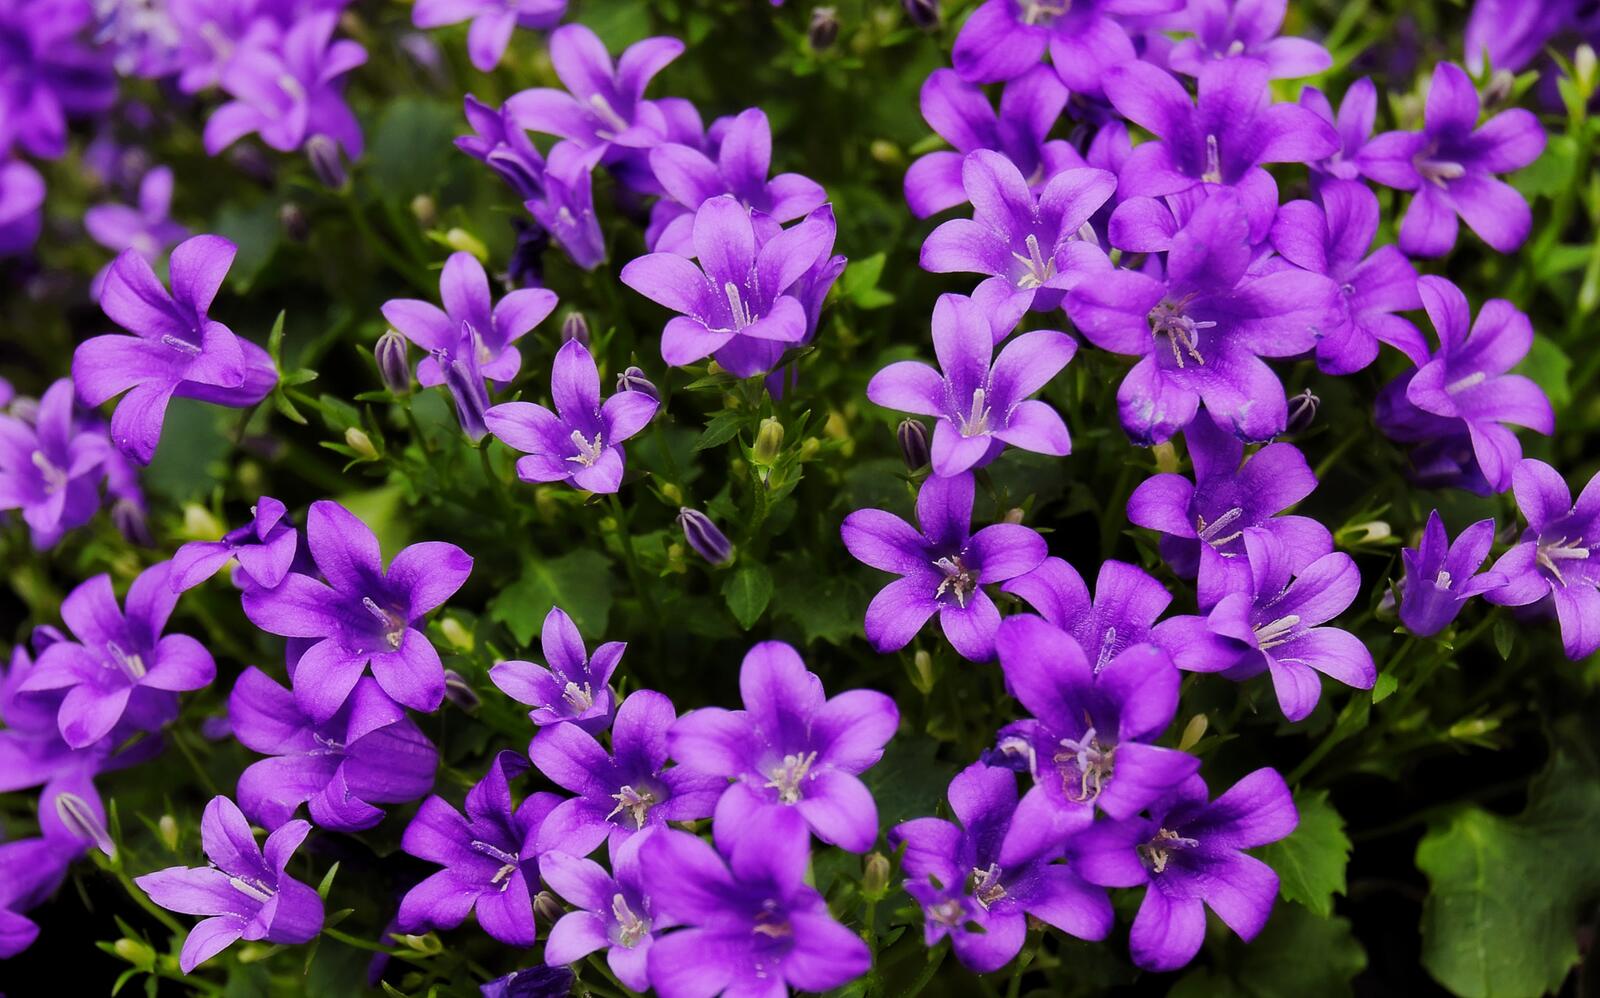 Wallpapers The flowers are lilac Campanula flora floral background on the desktop